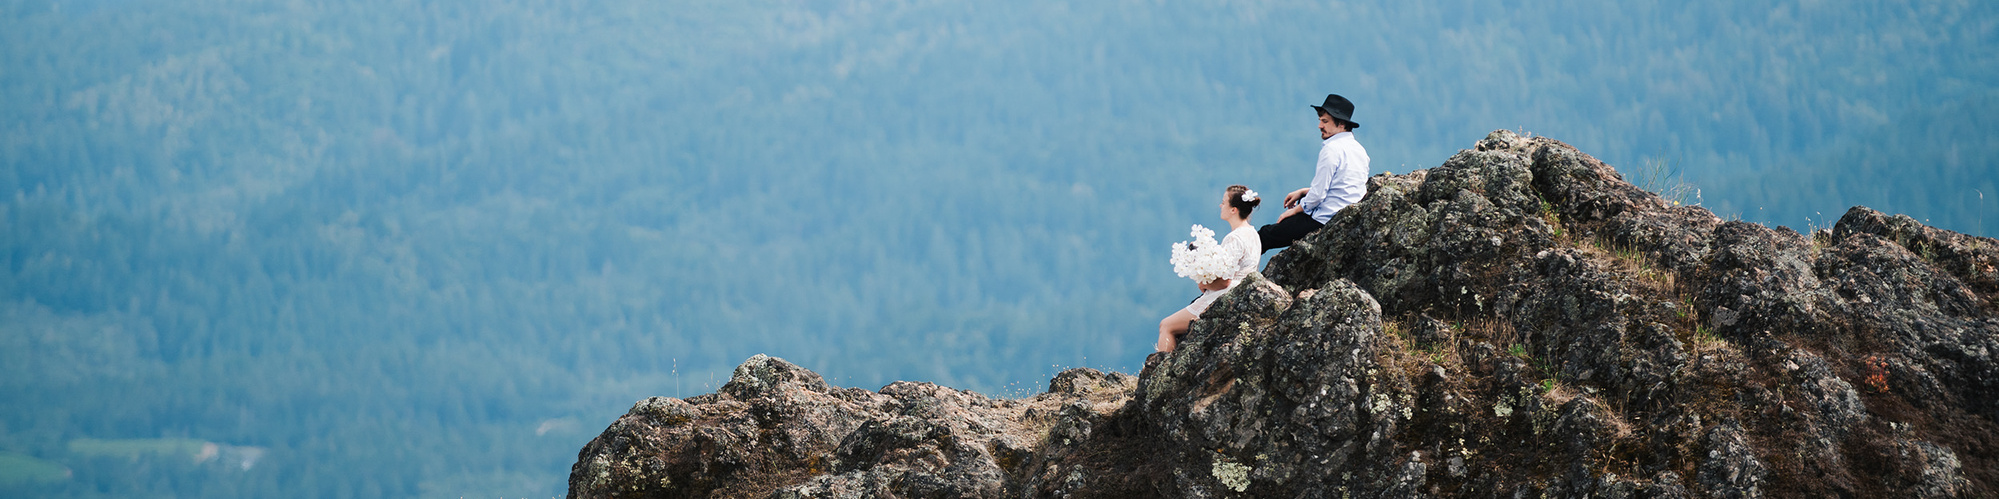 An eloping bride and groom perch on a large rock formation, looking out at the hazy blue mountains in the distance